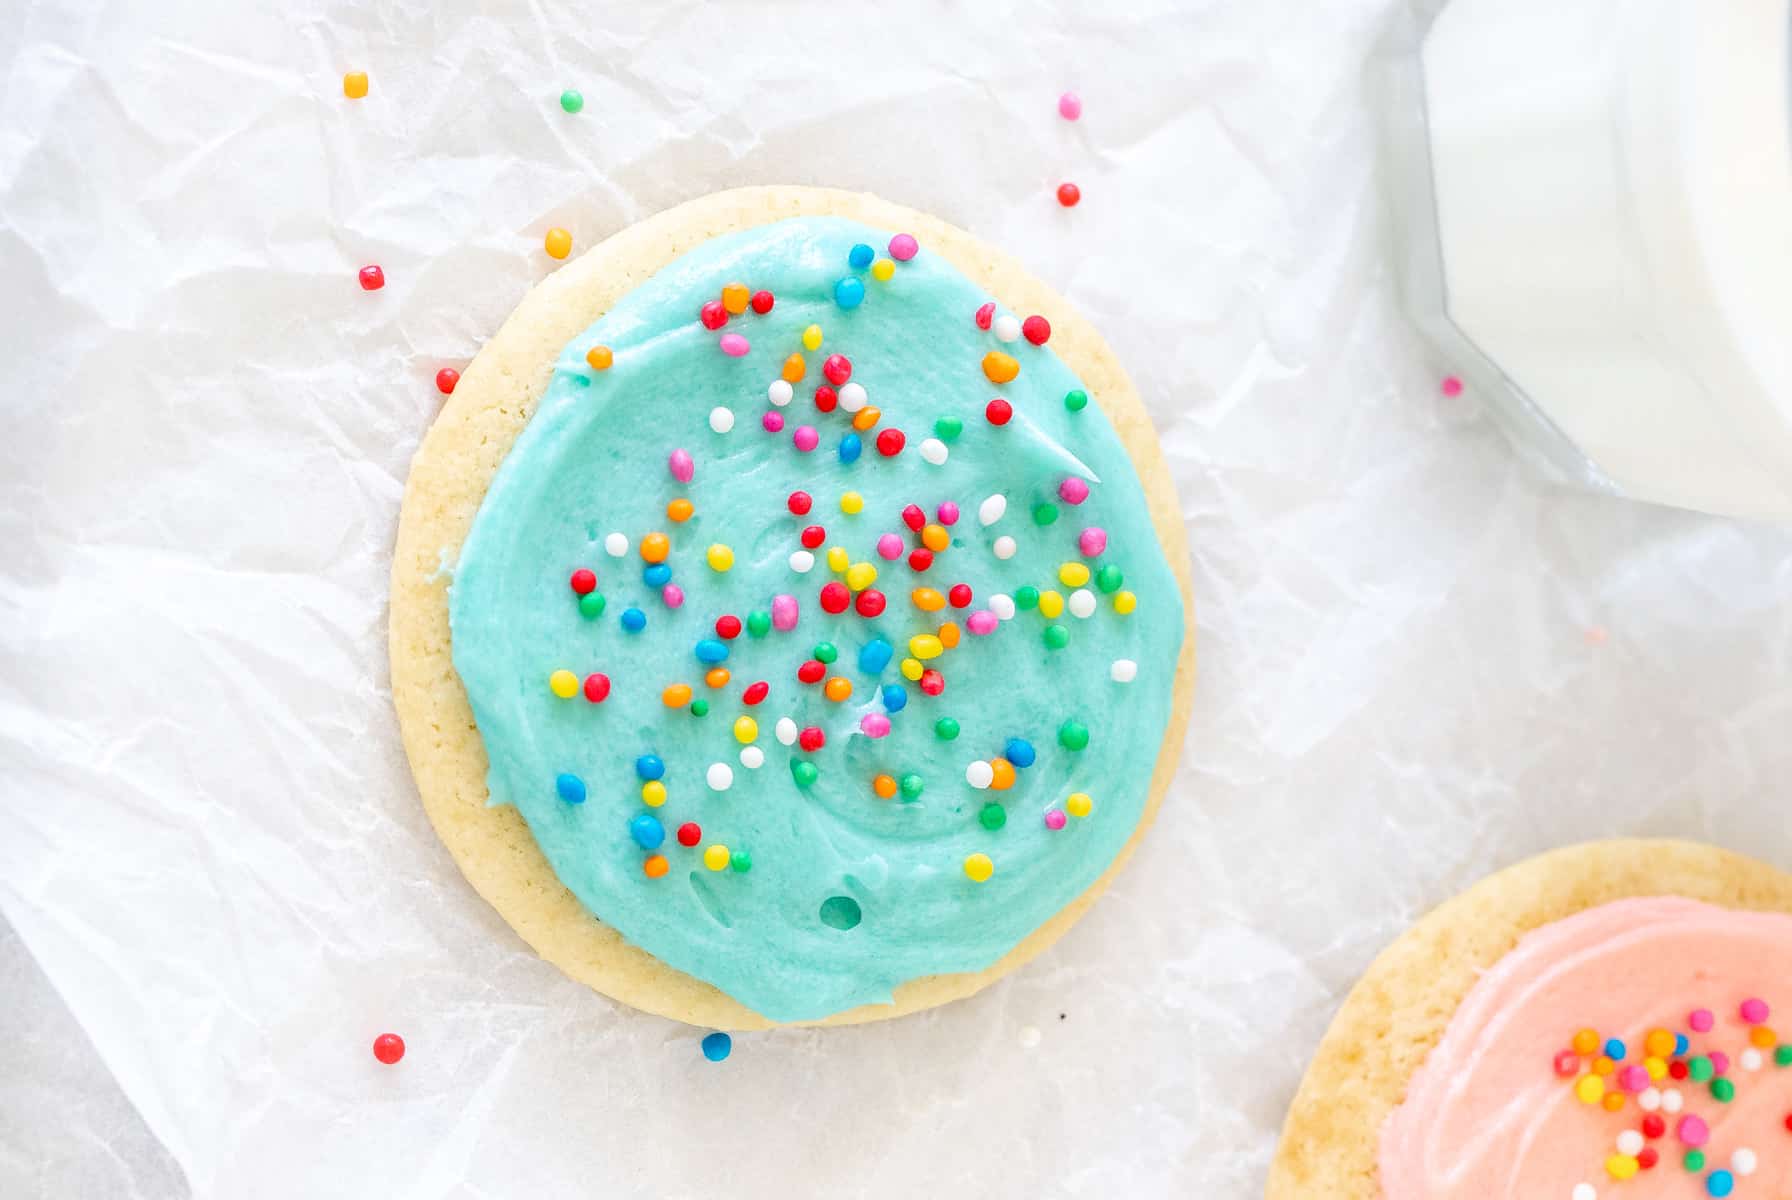 Eat Some 🍰 AI Randomly Generated Desserts to Determine If You’re an Introvert or Extrovert 😃 Sugar cookies